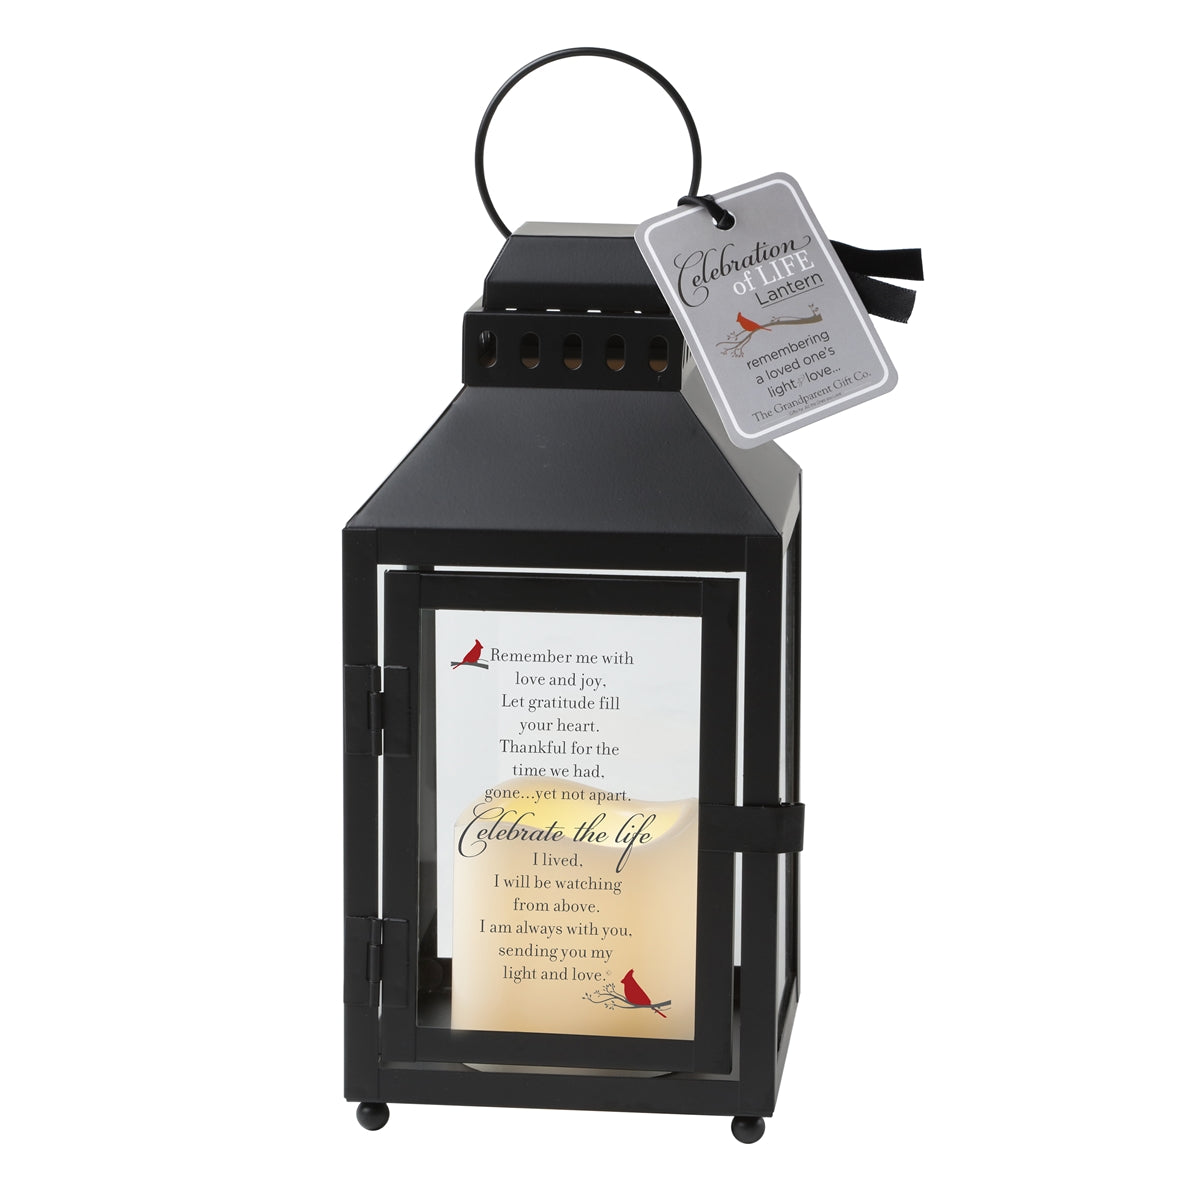 Celebration of Life sympathy black metal lantern with flickering built in candle, printed sentiment on glass panel and gift tag.